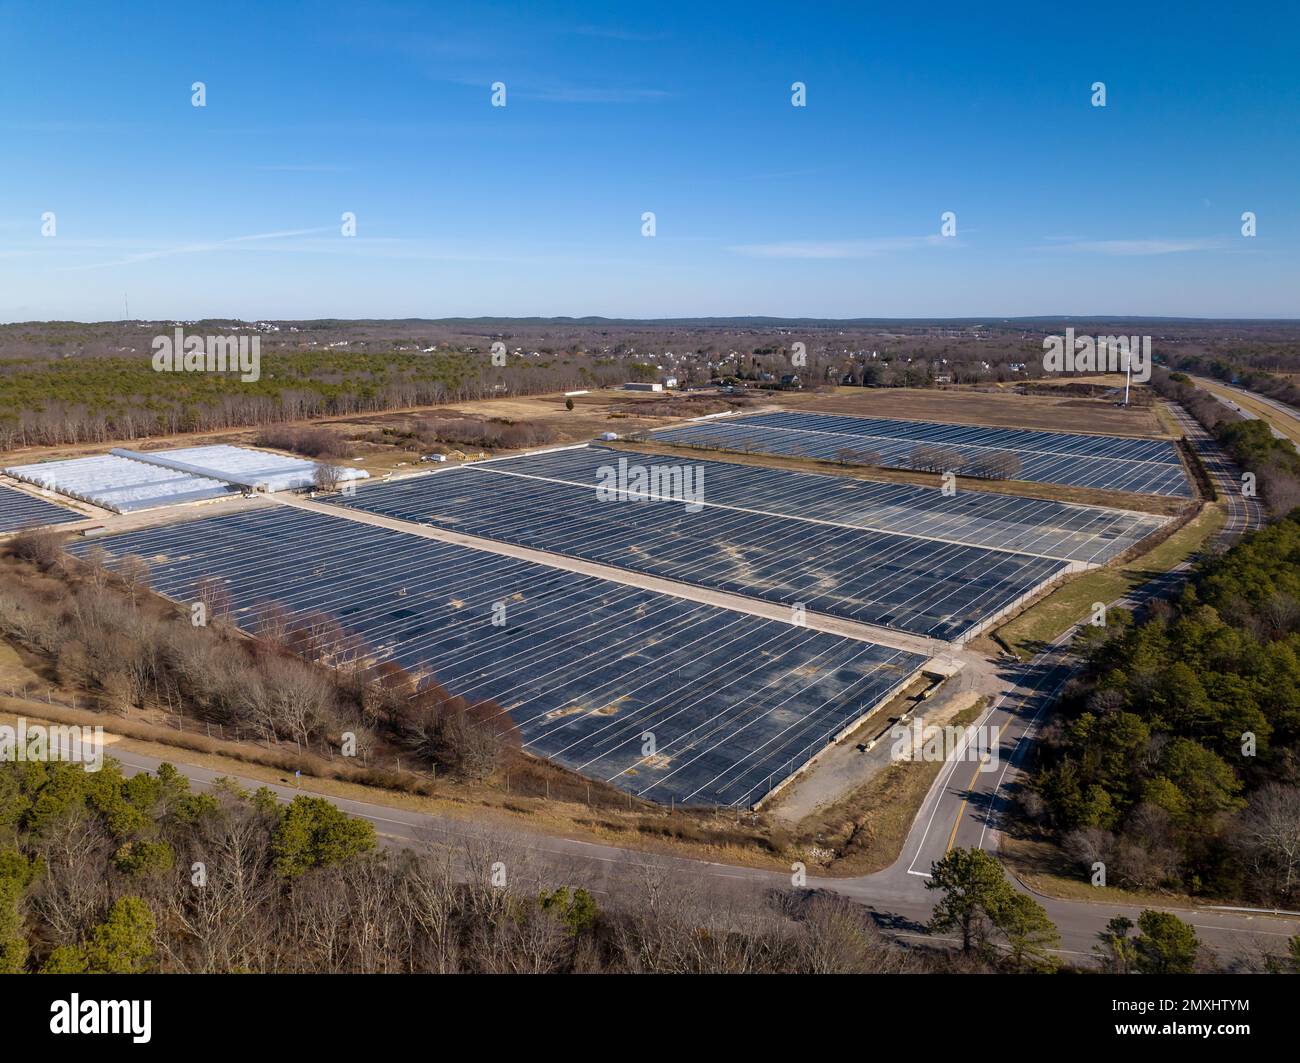 An aerial view of a landscape in East Moriches, NY Stock Photo